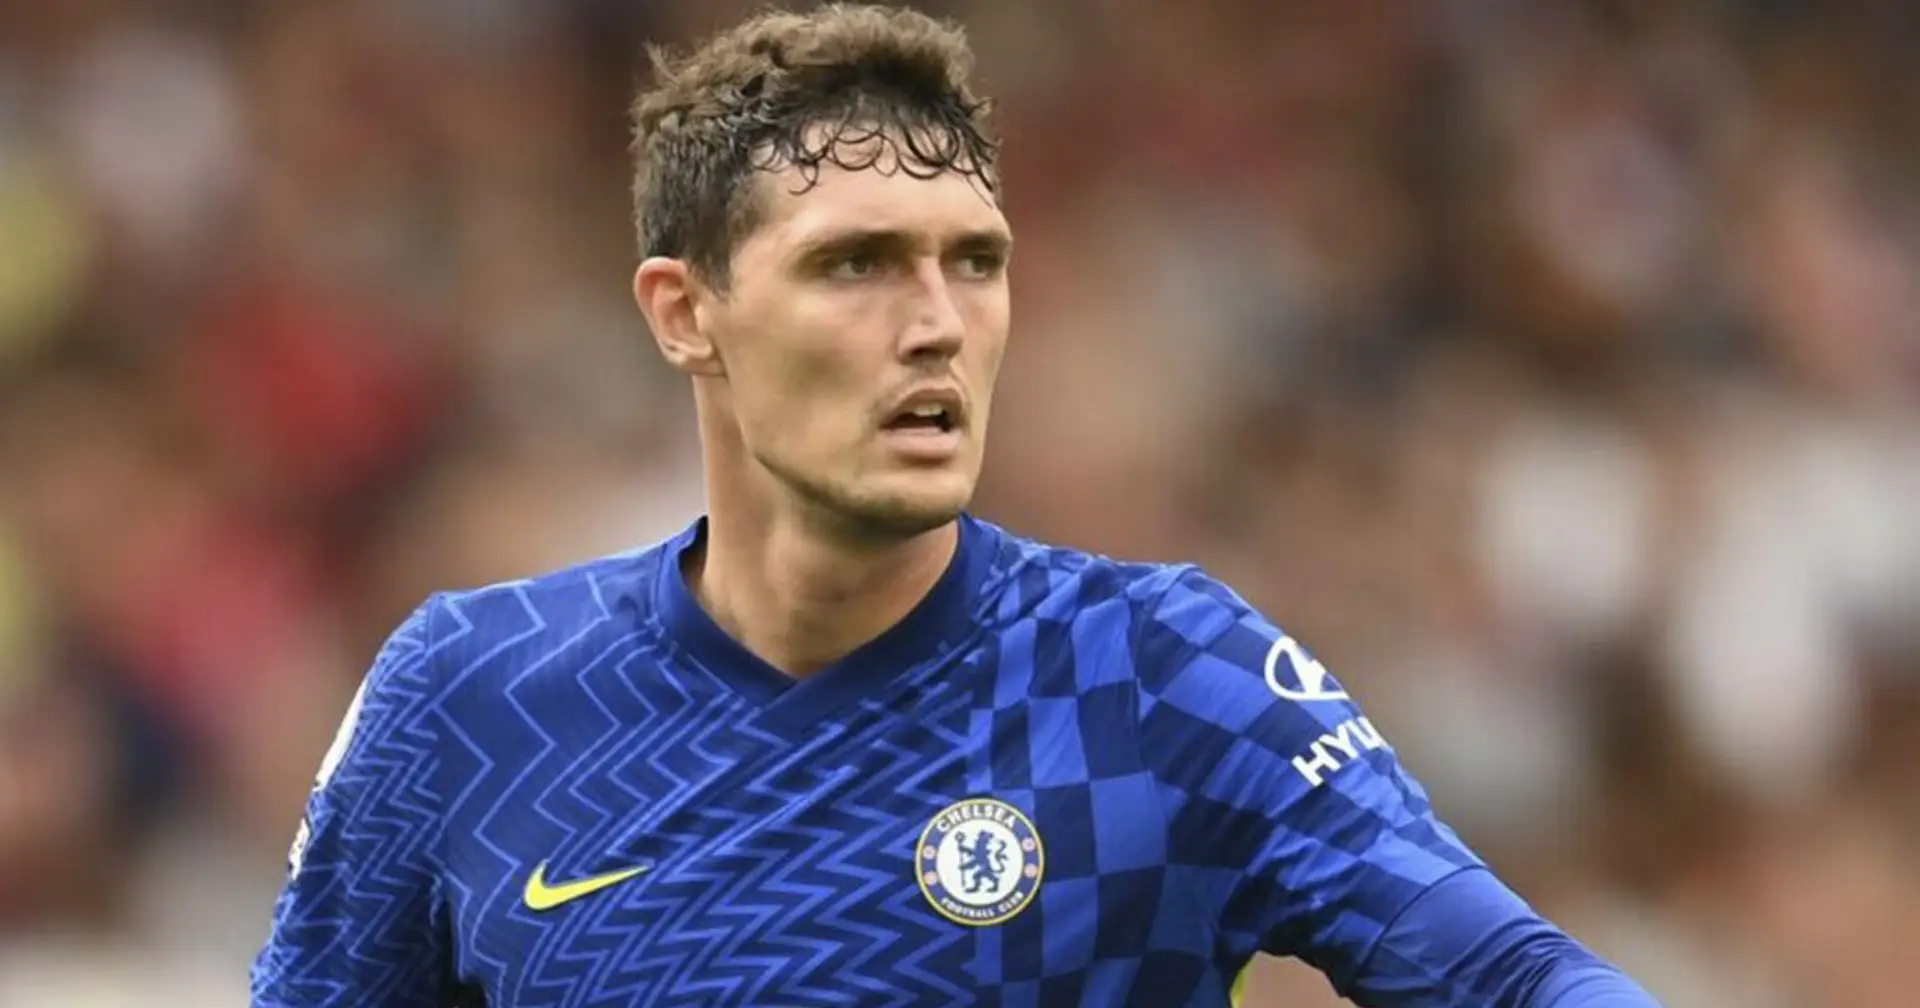 JUST IN: Barcelona 'working to sign Andreas Christensen' for free